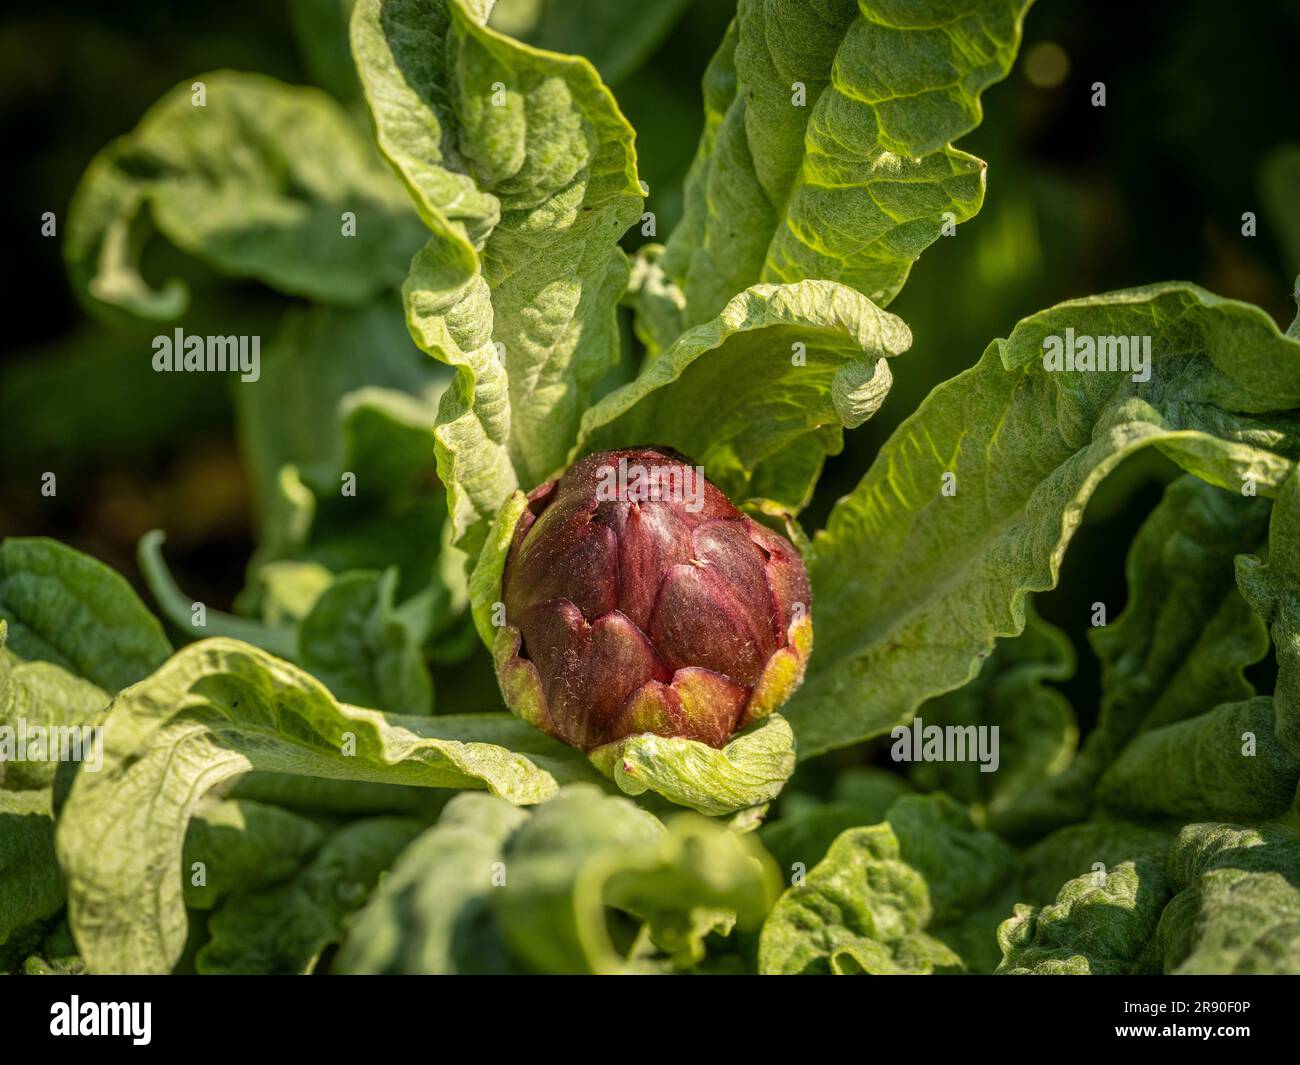 Close-up of a young Cardoon flower bud growing in a UK garden. Stock Photo